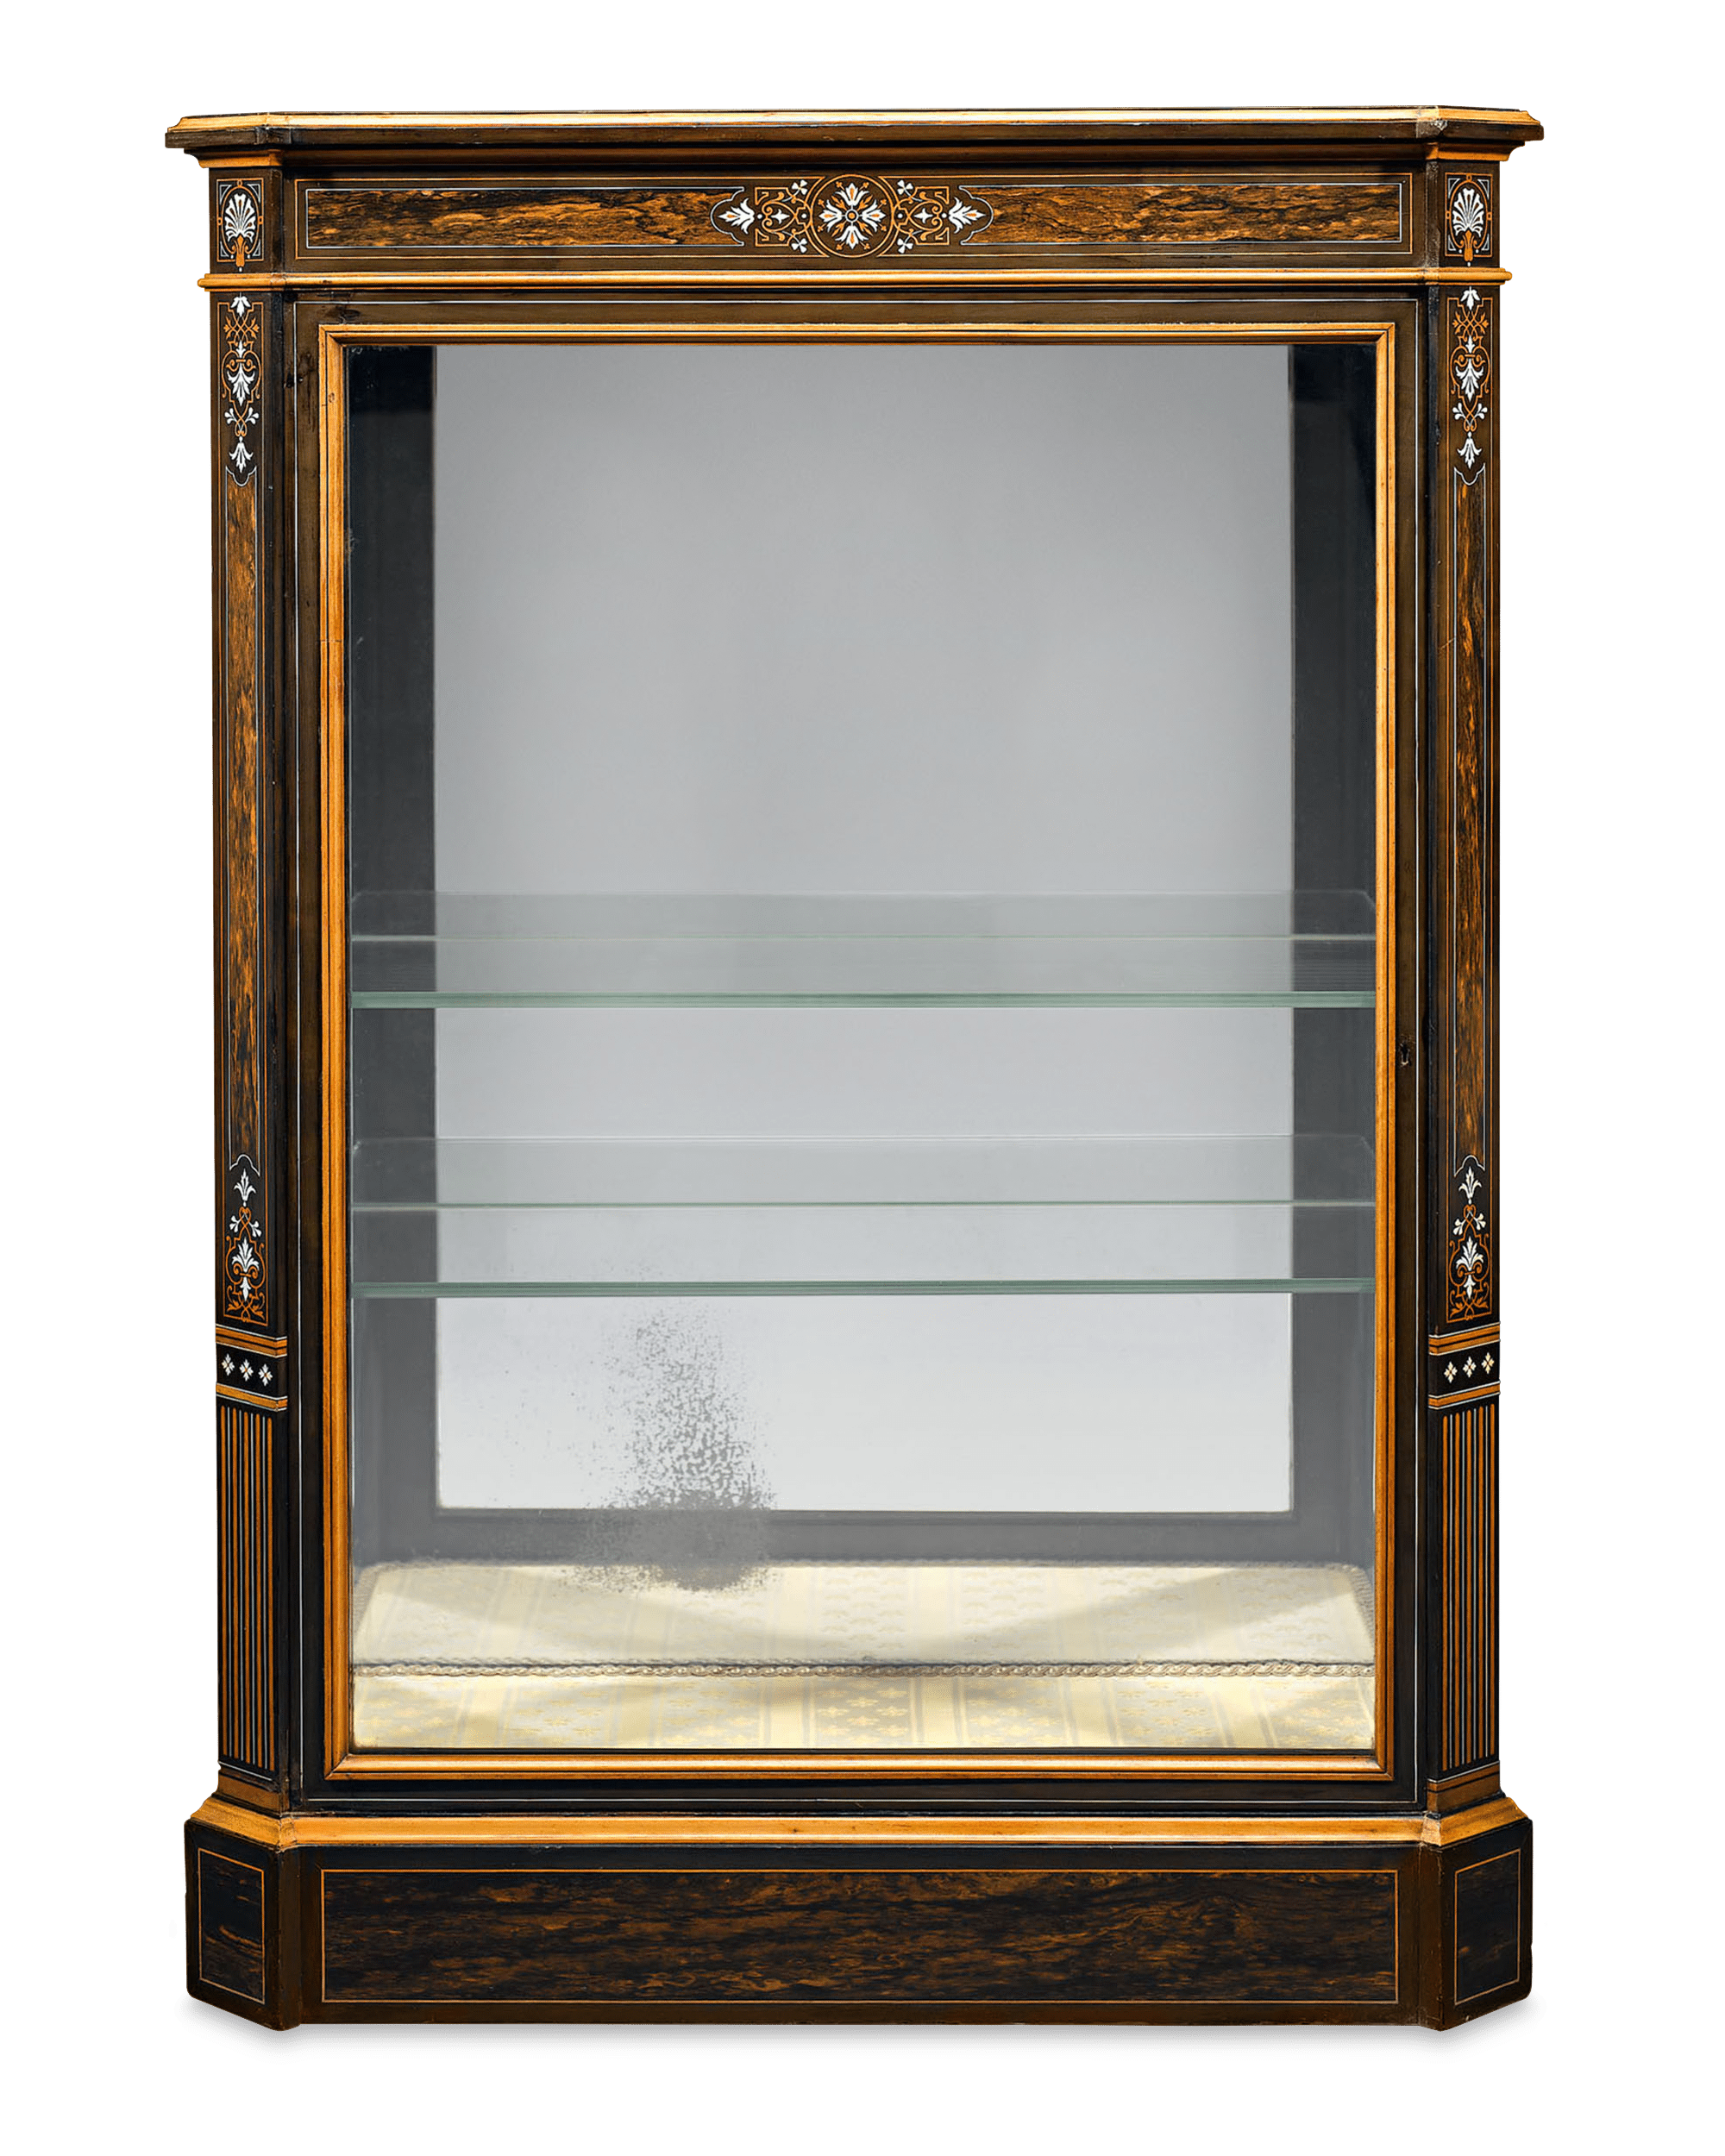 Crafted of luxurious coromandel, this vitrine is a work of art in itself